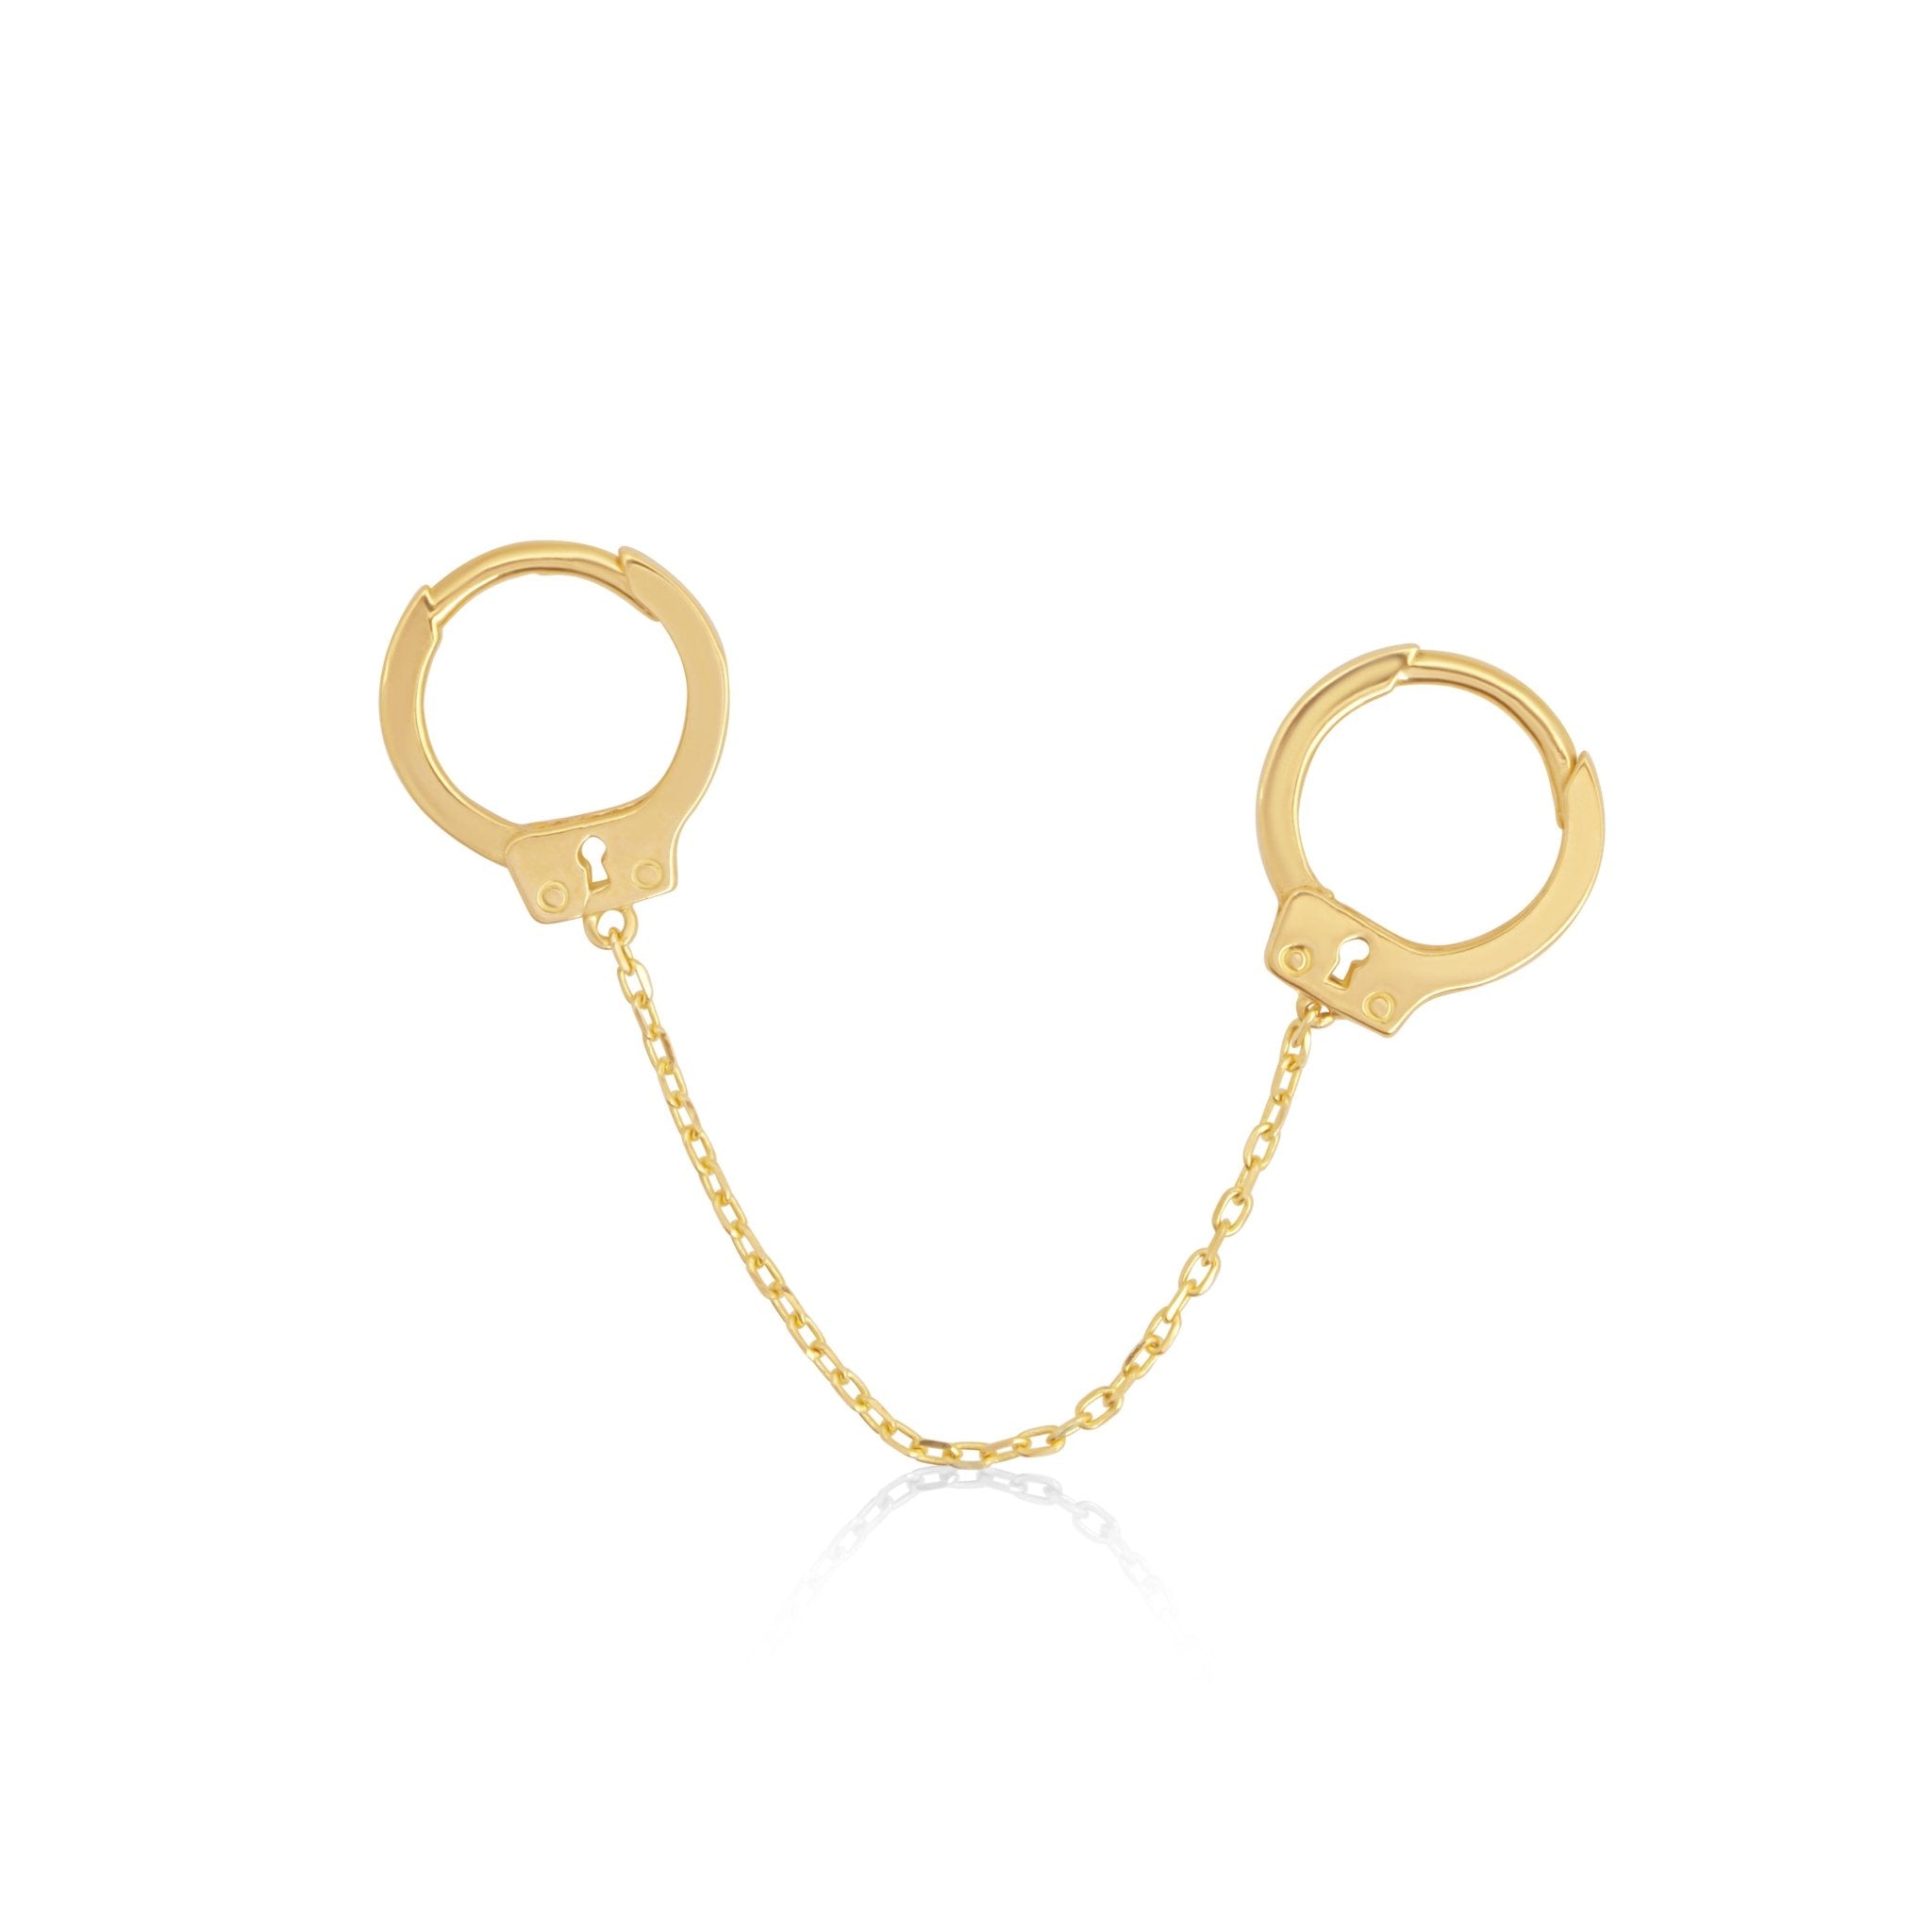 Handcuff Double Hoop Earring with Chain Earrings Estella Collection #product_description# 18378 14k cartilage hoop Cartilage Hoops #tag4# #tag5# #tag6# #tag7# #tag8# #tag9# #tag10#